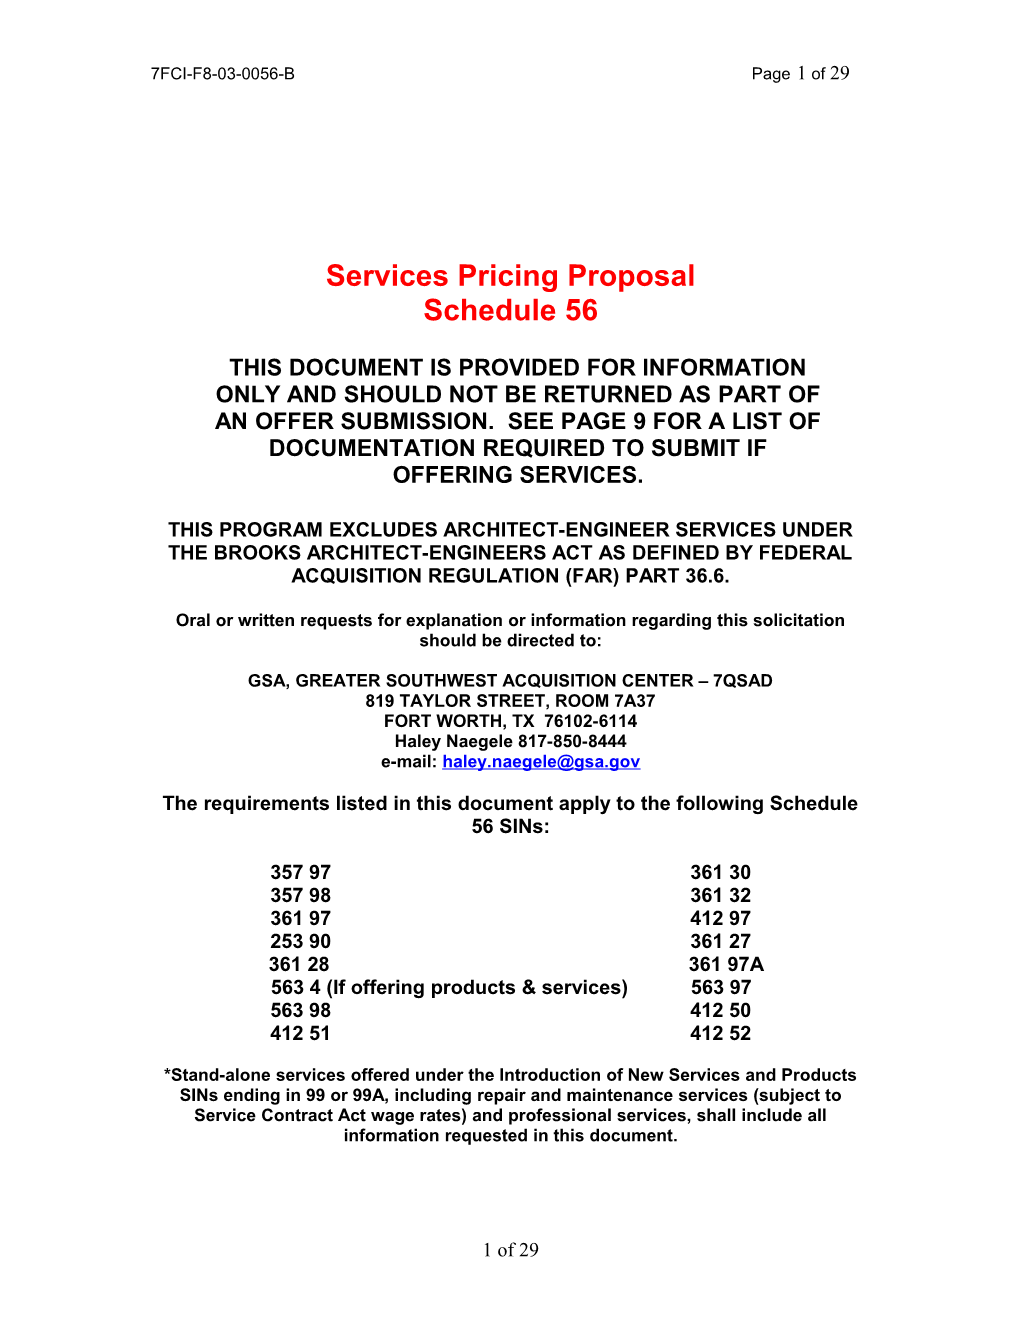 Services Pricing Proposal